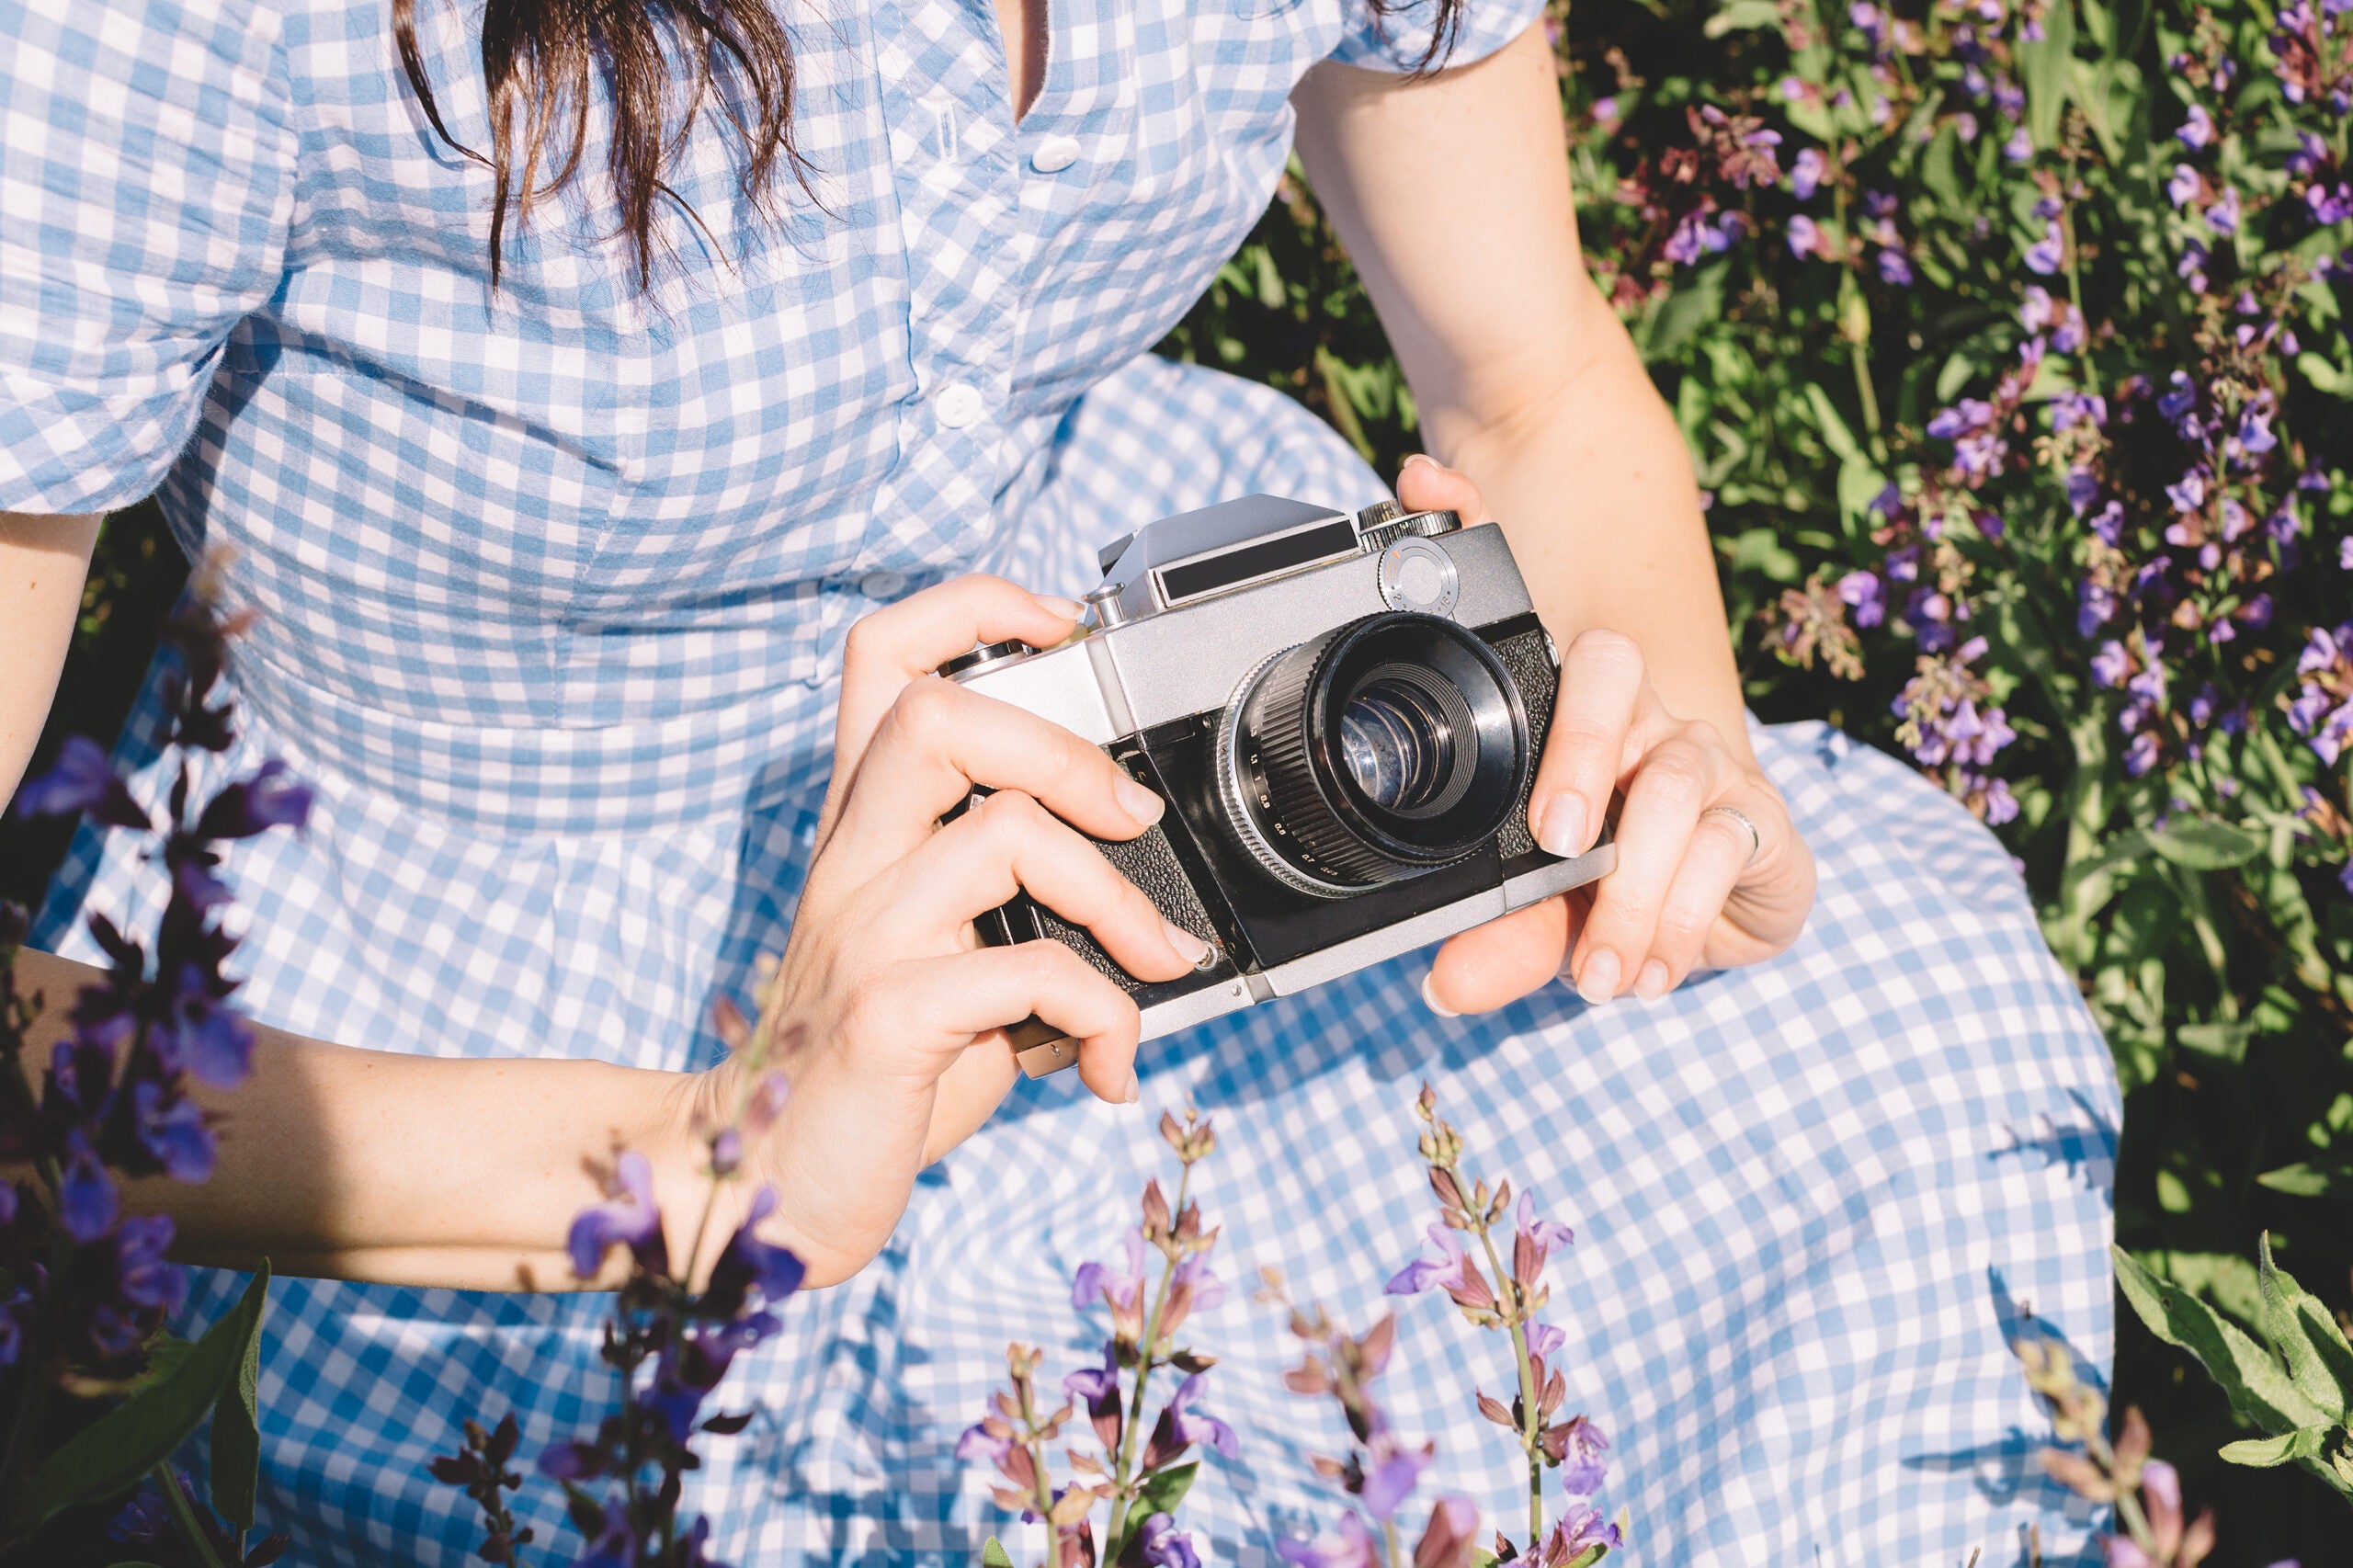 Camera in the hands of a white woman in a blue dress on a background of lavender flowers outdoors